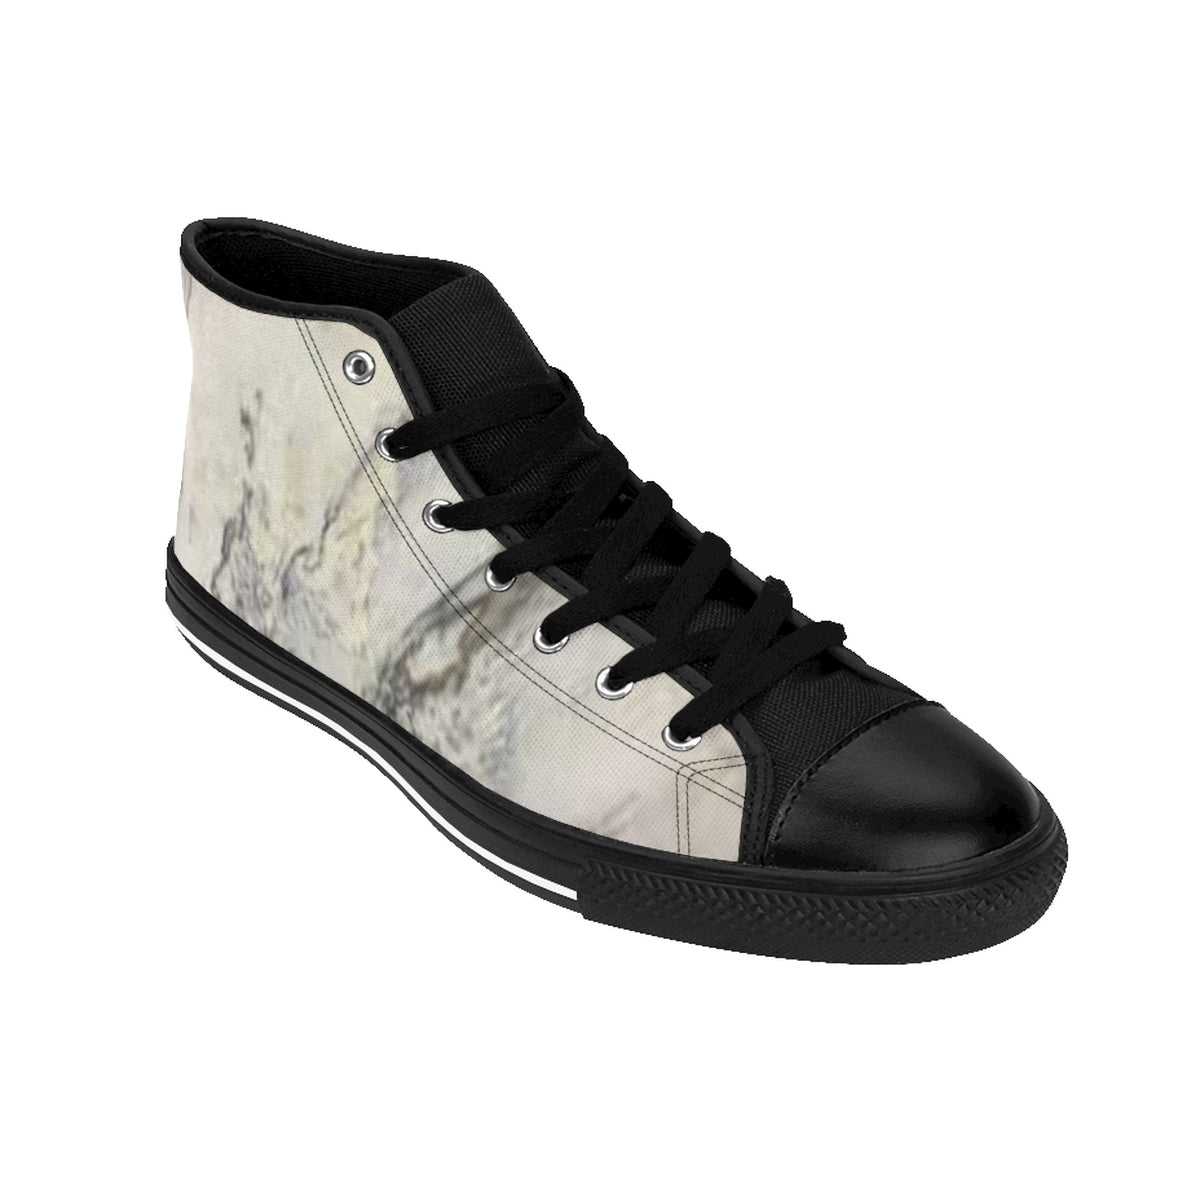 MojoSoMint Marble High-top Sneakers - MojoSoMint